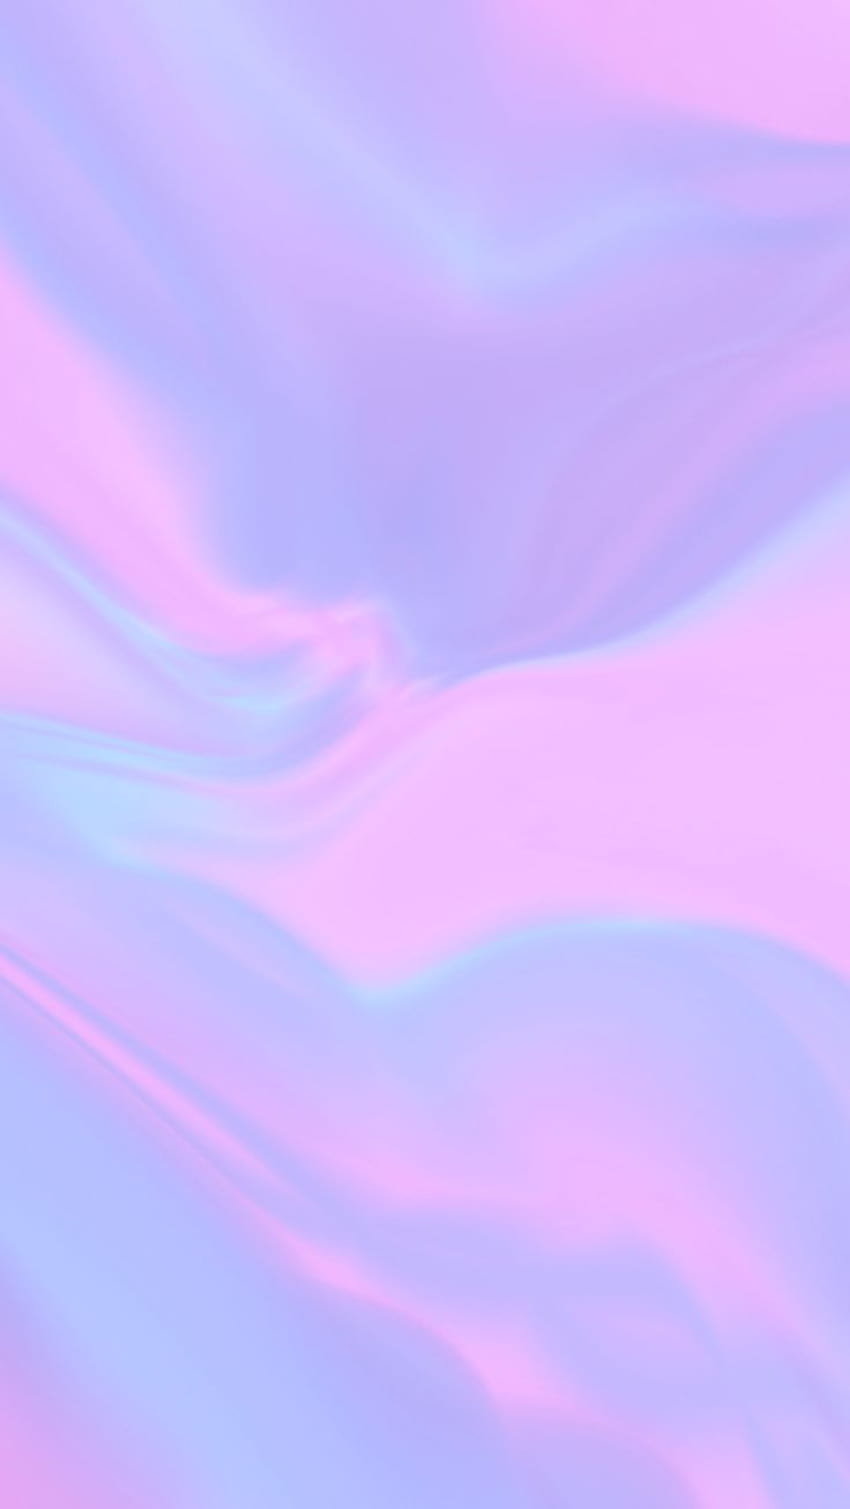 Abstract Pink Purple Blue Pastel Swirls Mobile Phone Backgrounds . Made by Visual… in 2020, pastel purple and blue HD phone wallpaper